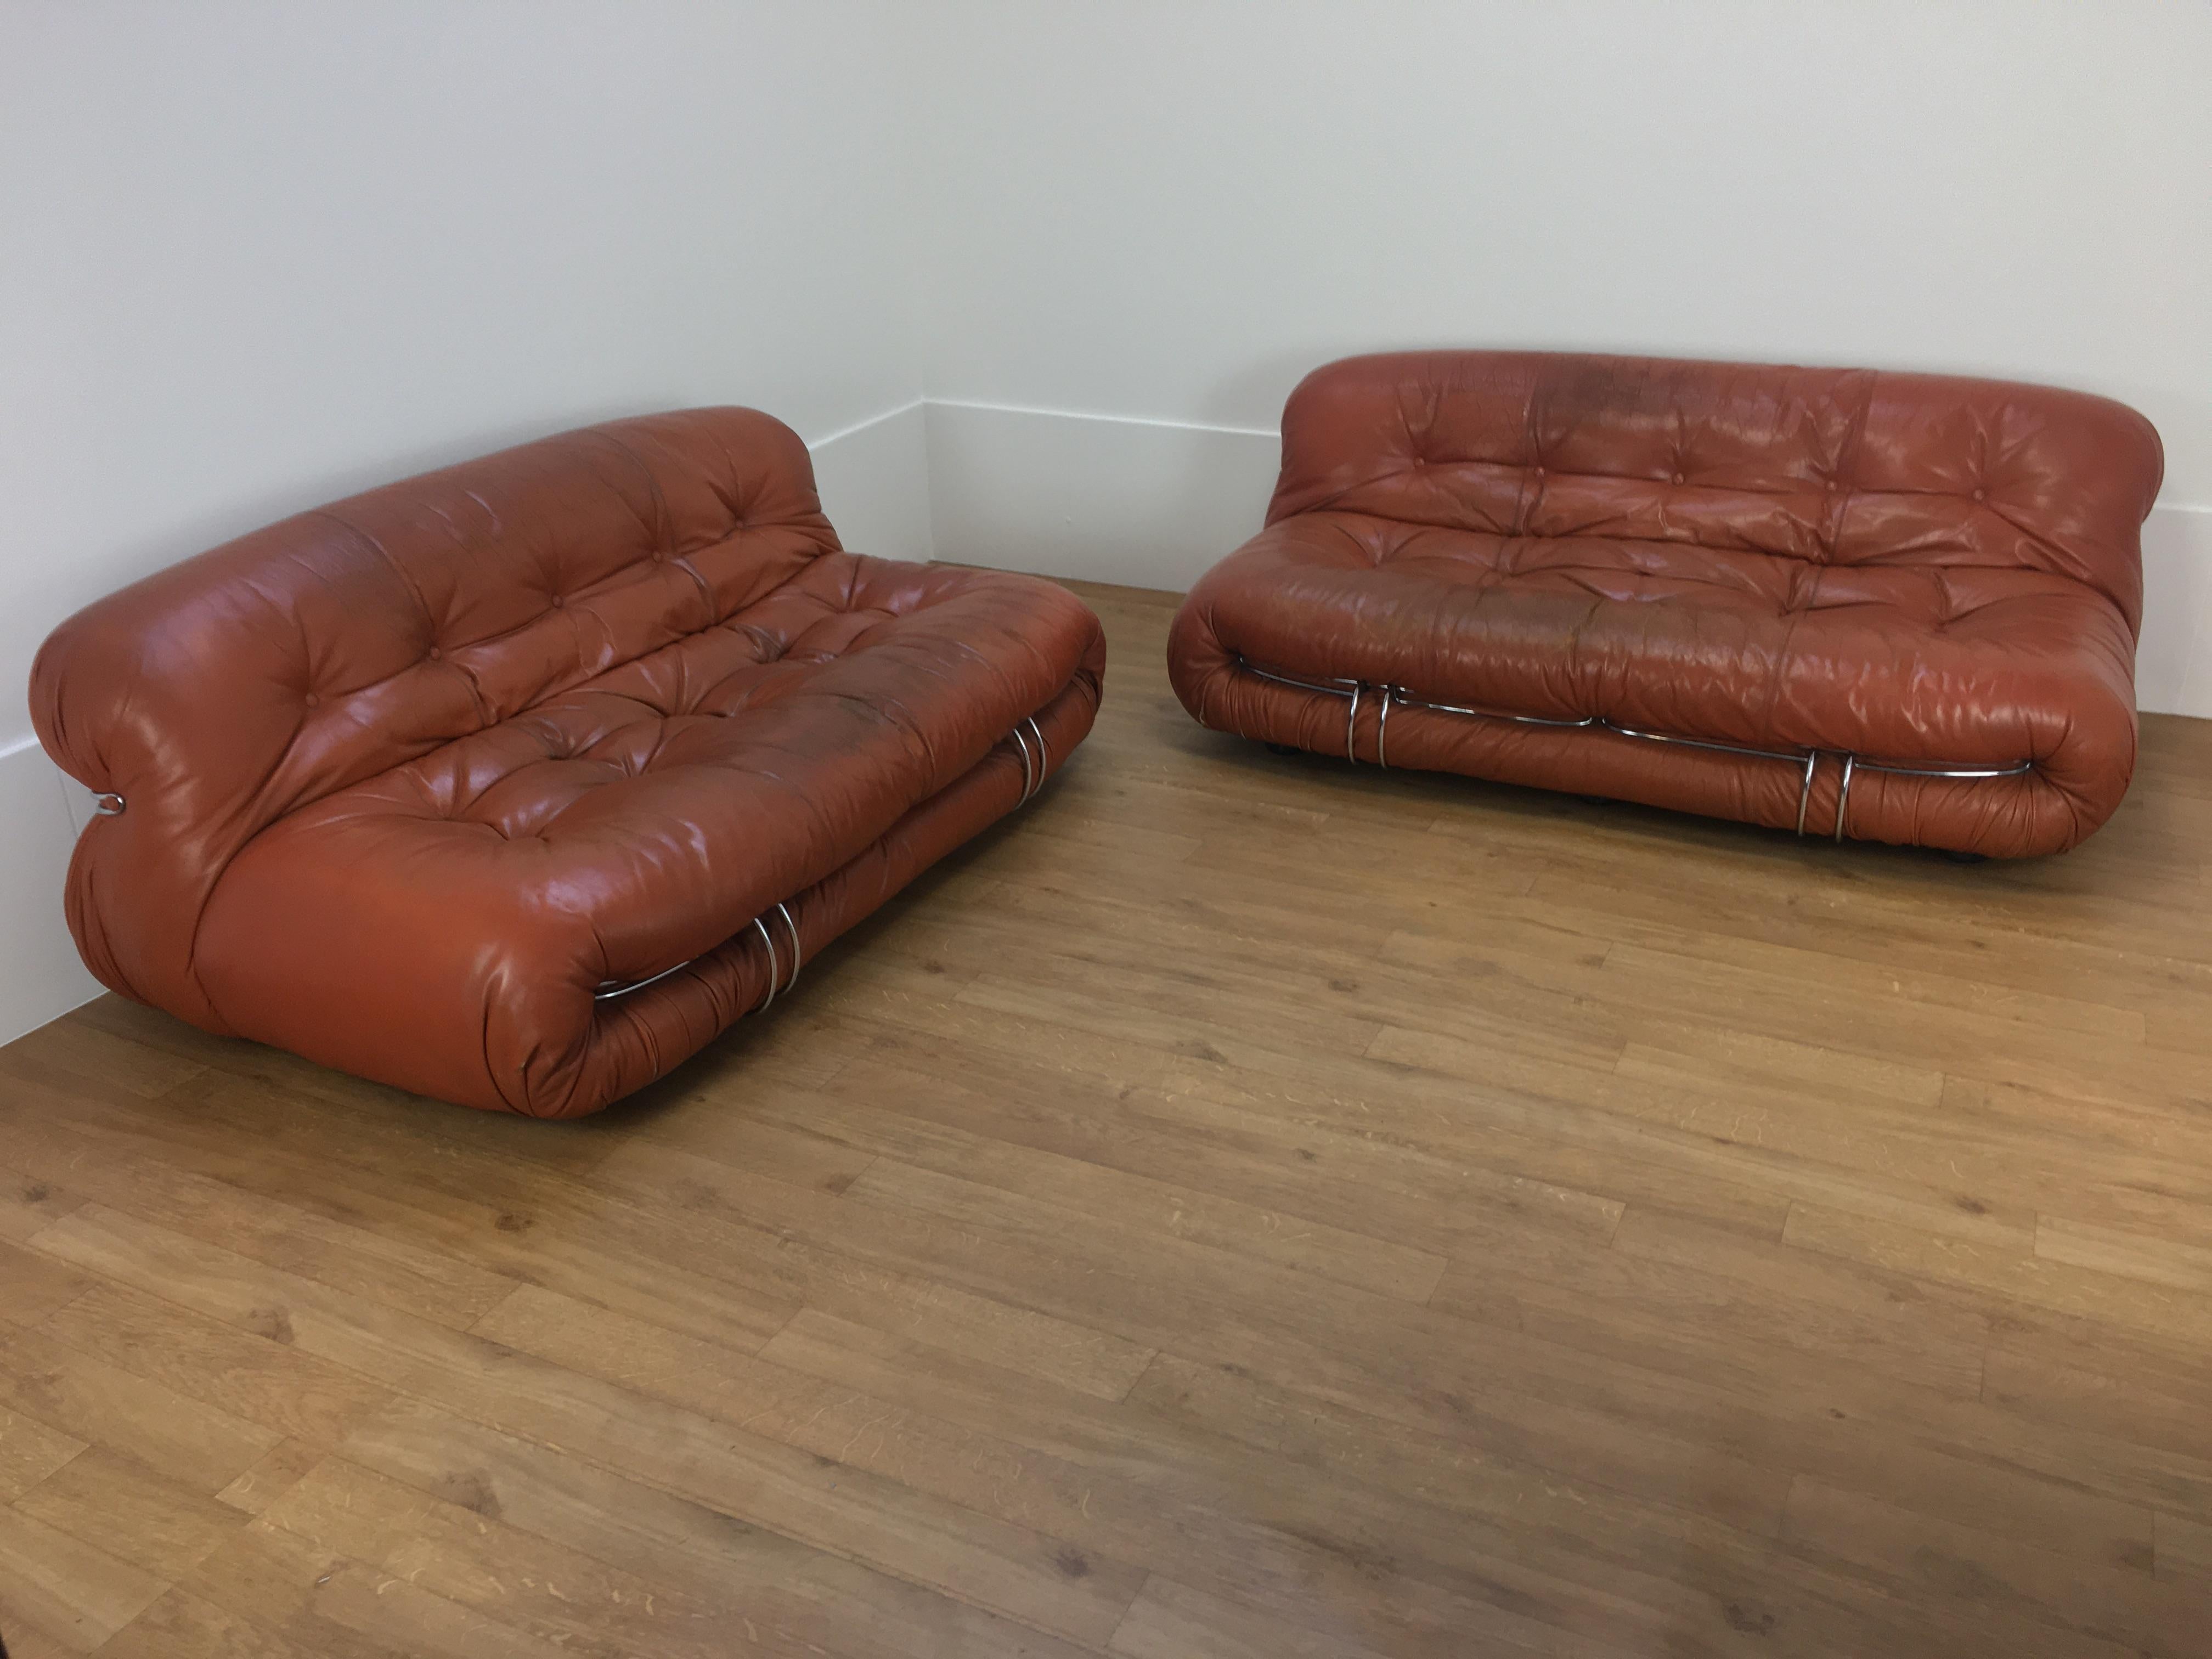 Original pair of Soriana sofas designed by Afra & Tobia Scarpa in 1969. These are vintage ones, manufactured in the 70's in Italy by Cassina. They haven't been renovated, they're in their original condition, it's up to you to decide what kind of